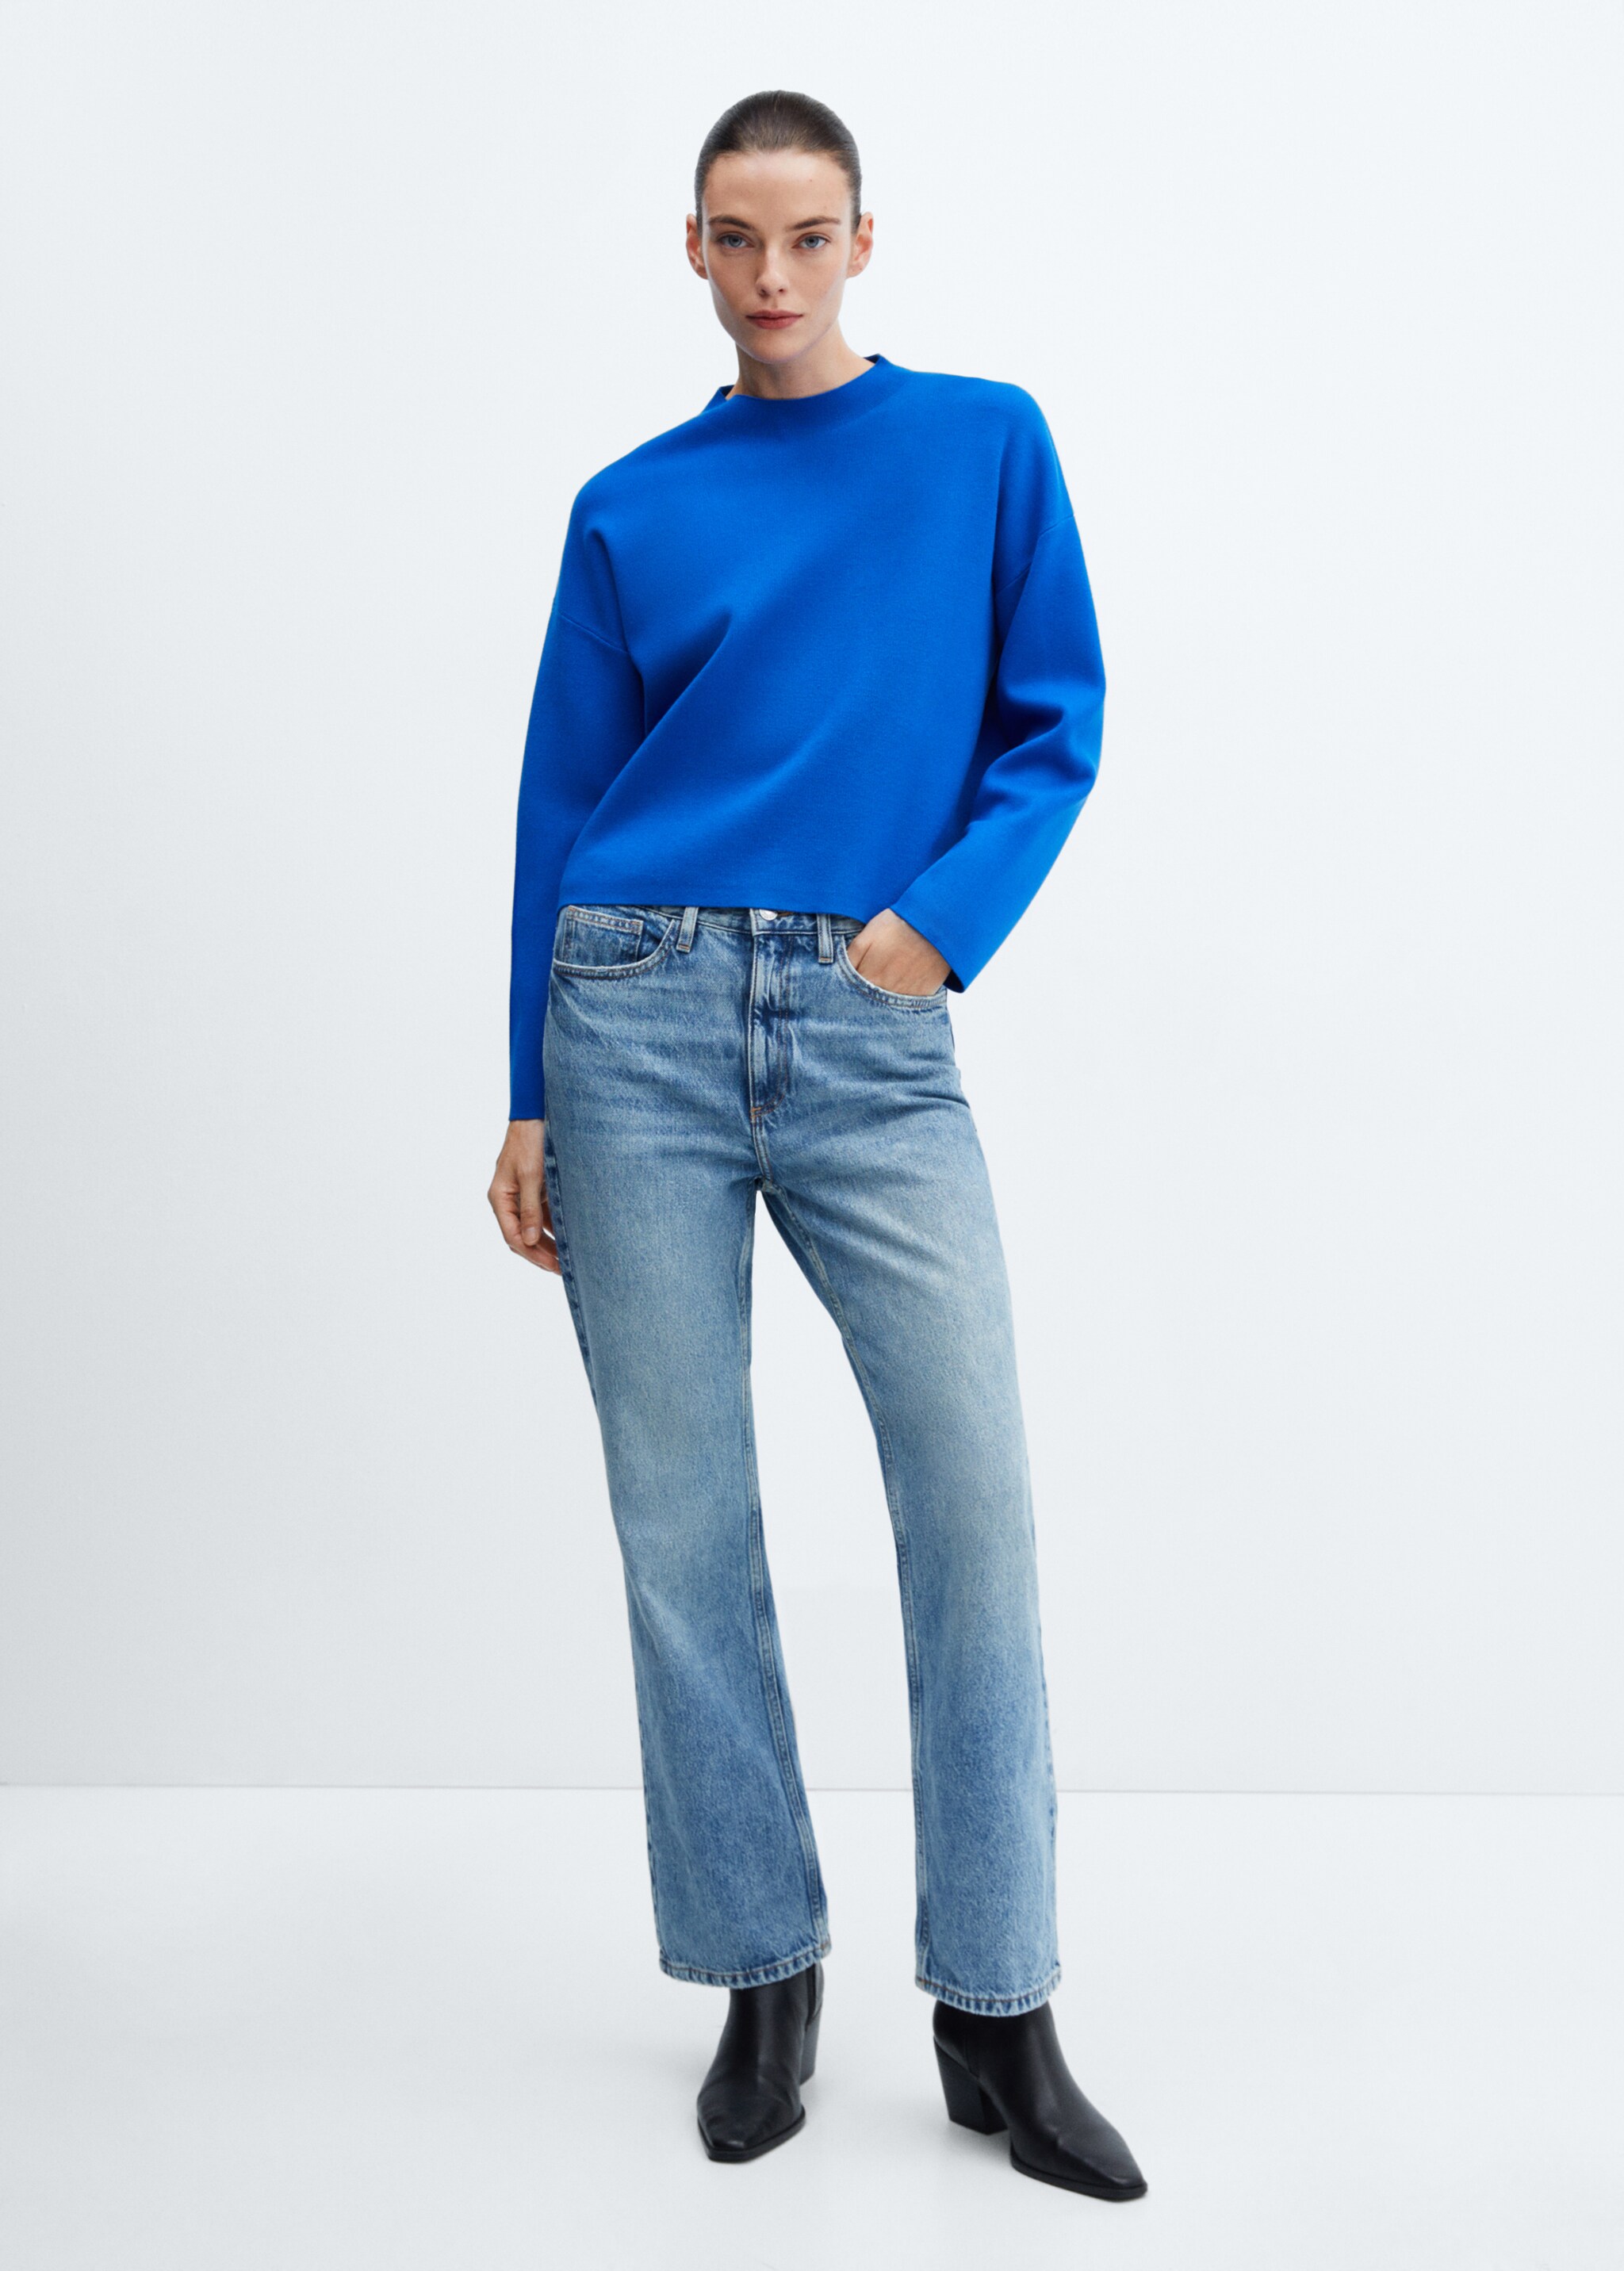 Perkins neck knitted sweater - General plane